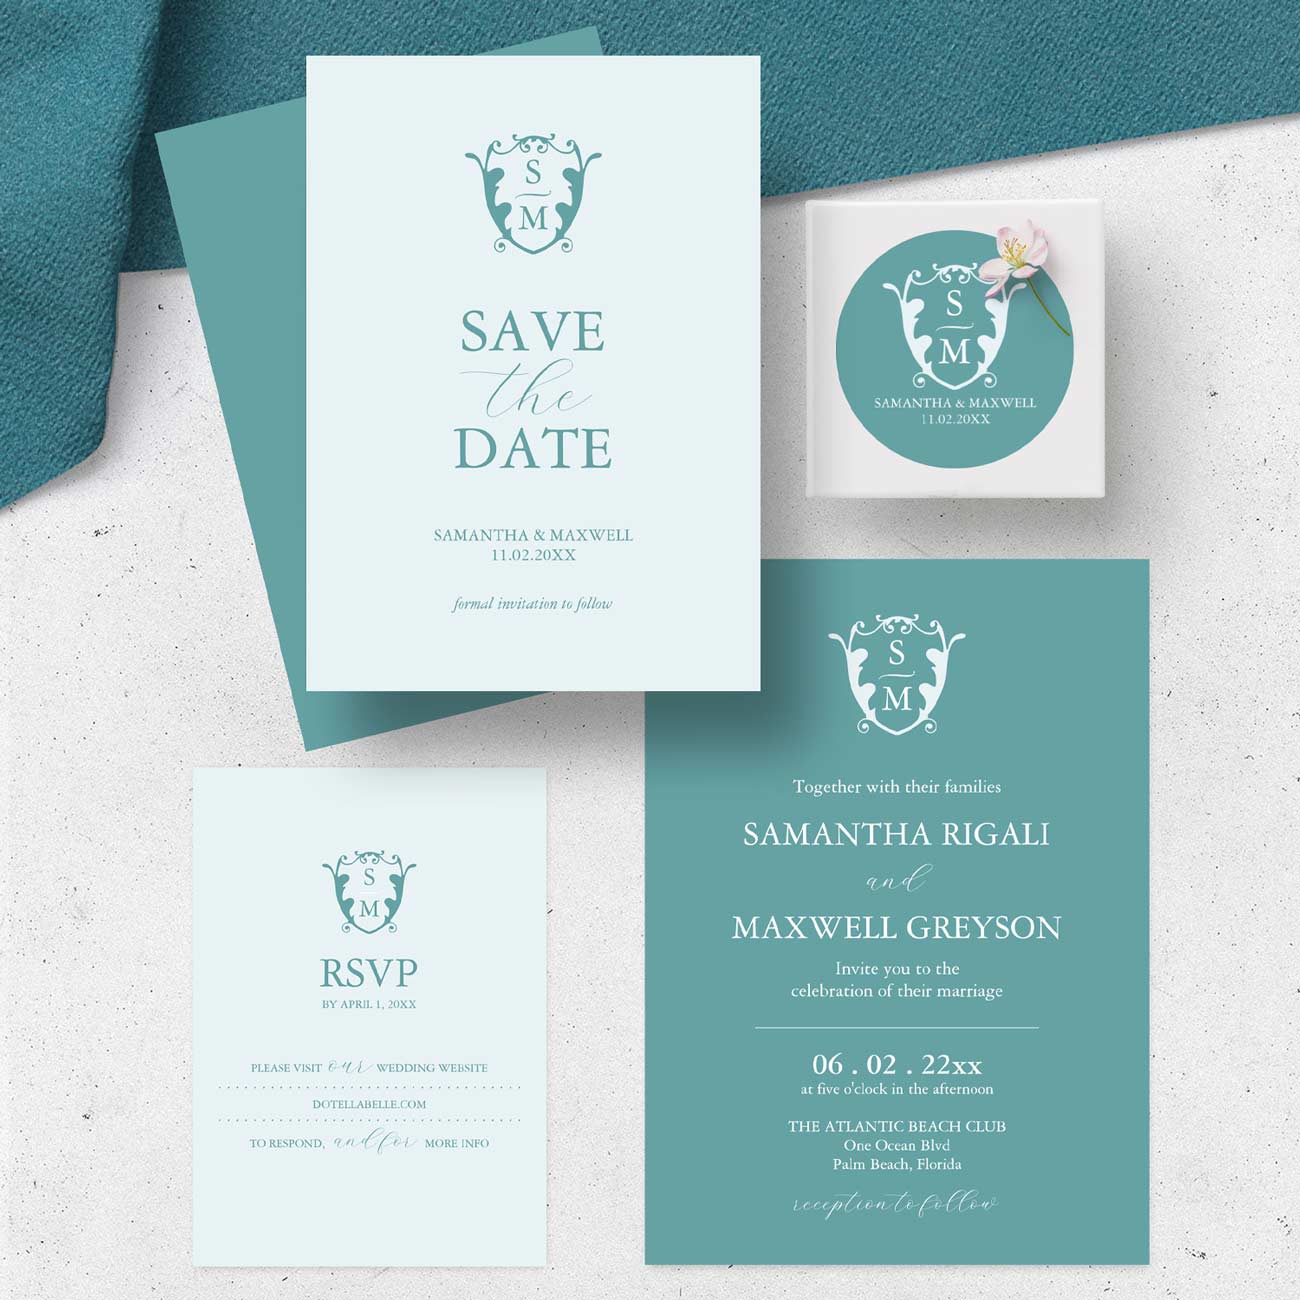 This simple design features wedding stationery with your custom monogram in cool colors of blue and green. Choose one color or mix and match. Click the image to shop the full line.